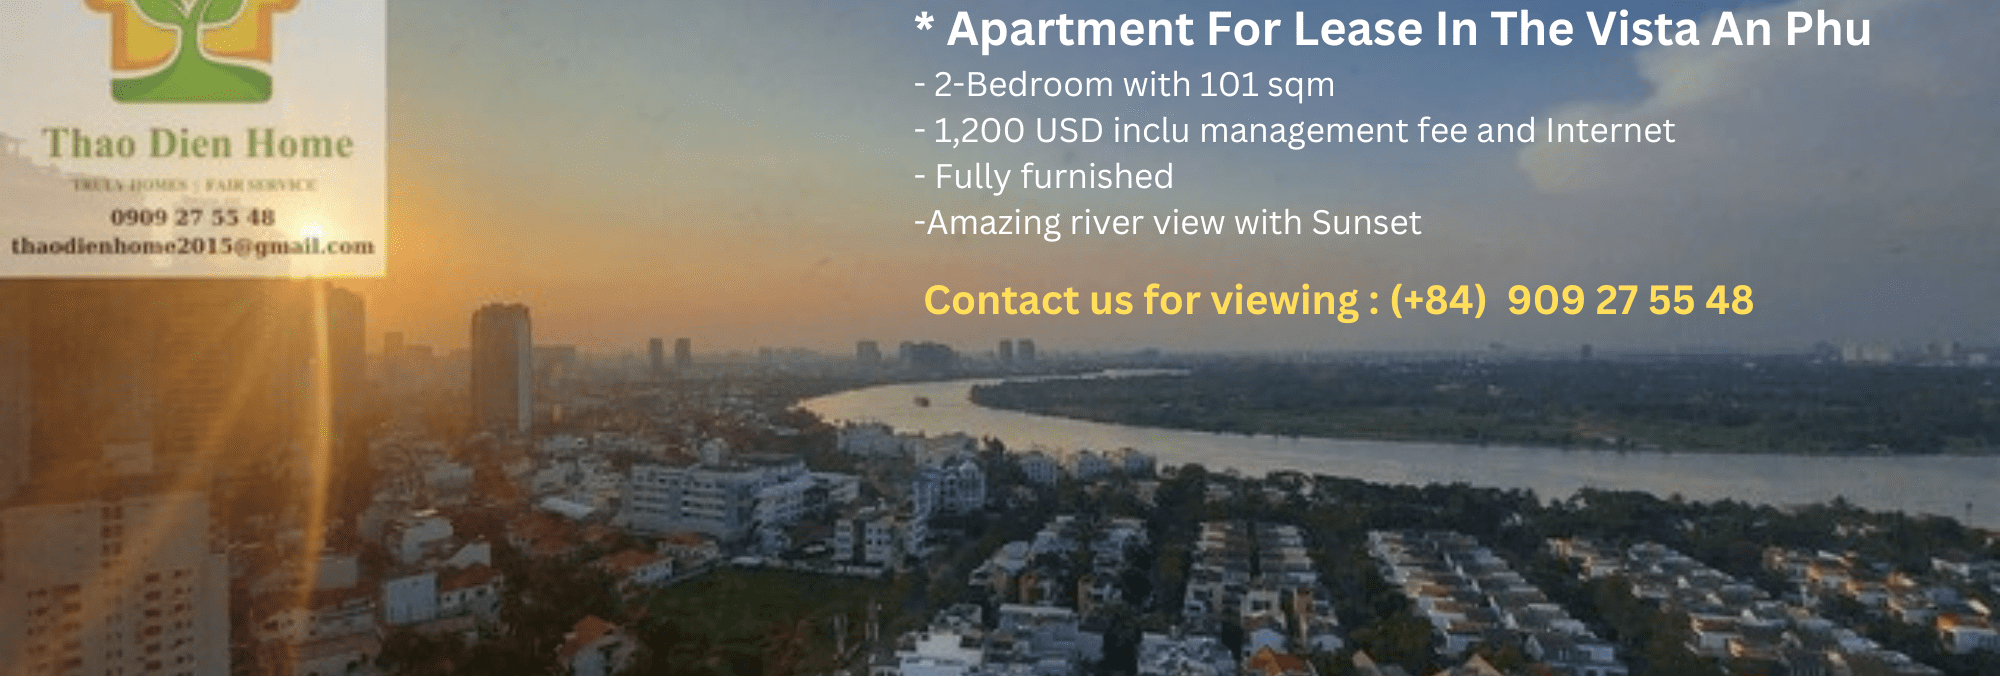 For Rent 2-Bedroom Fully Furnished Apartment In The Vista An Phu With Amazing River View